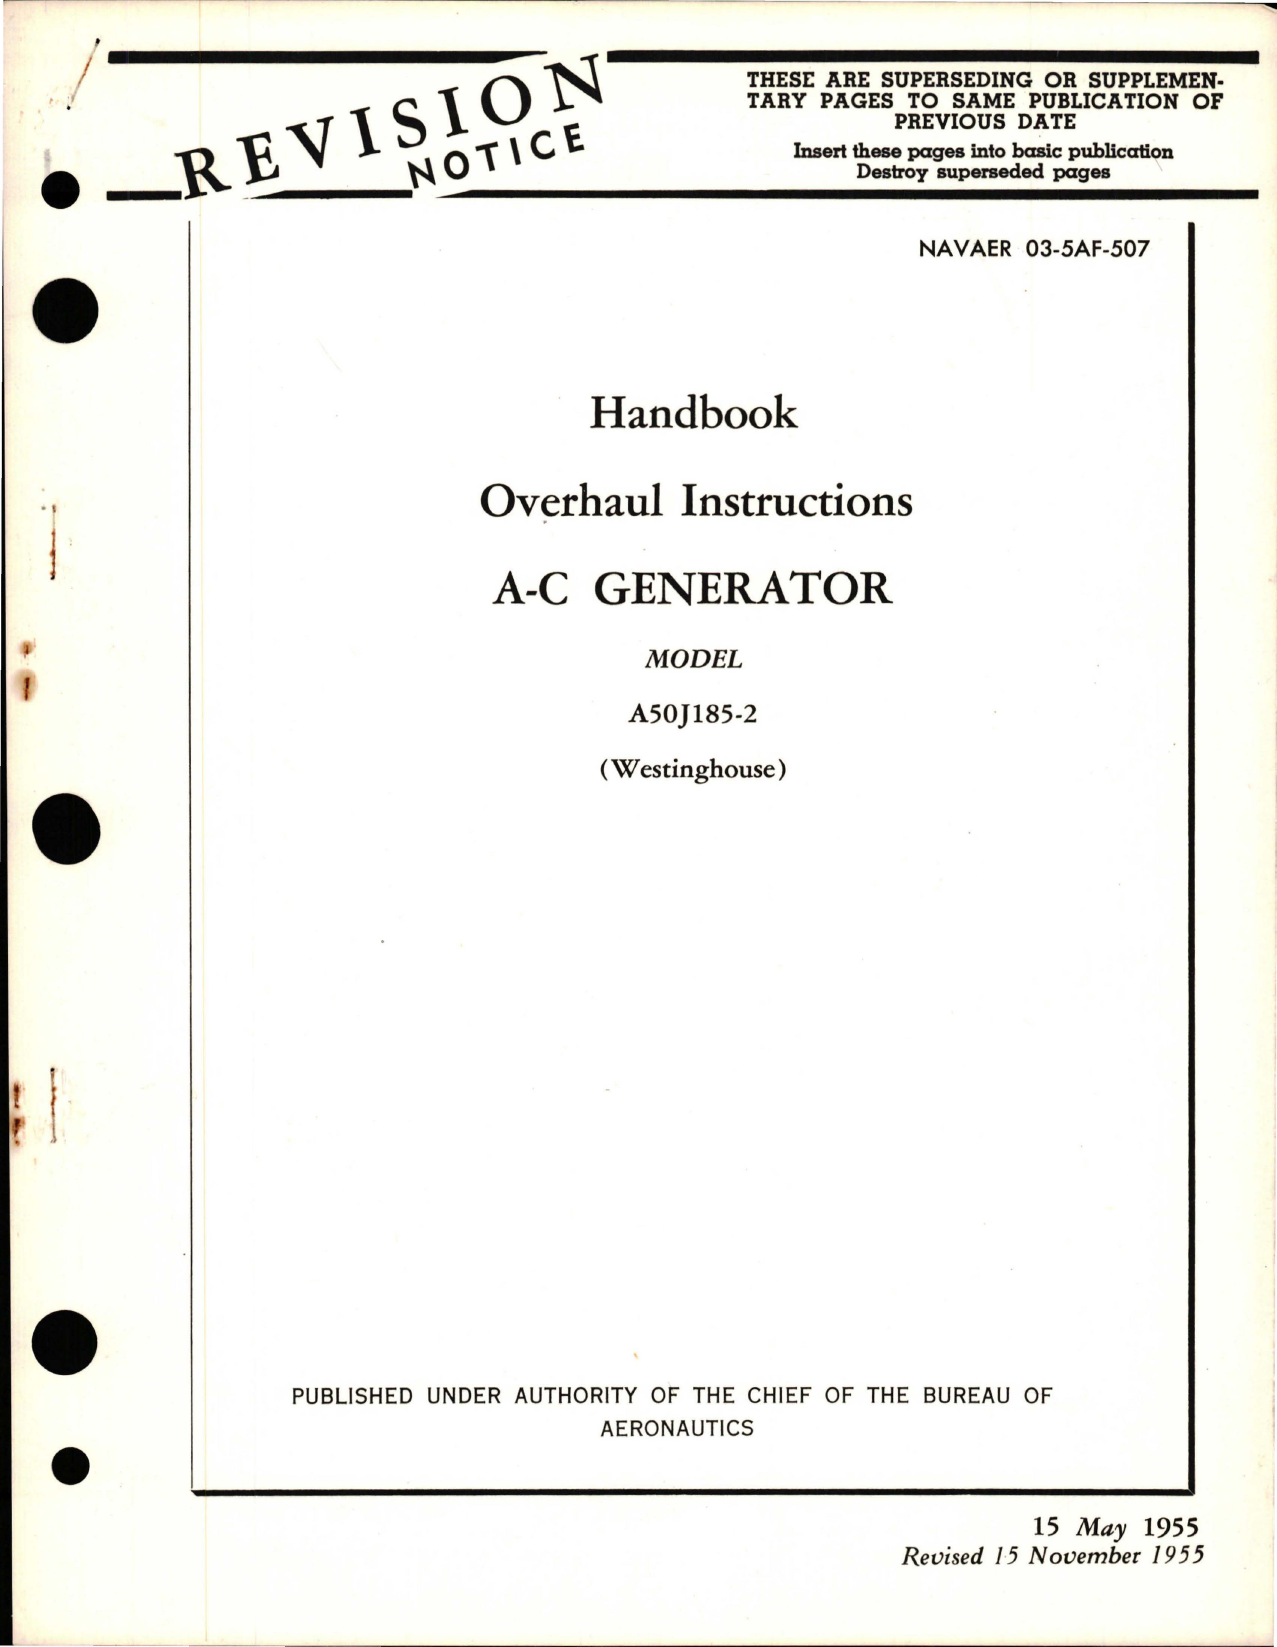 Sample page 1 from AirCorps Library document: Overhaul Instructions for AC Generator - Model A50J185-2